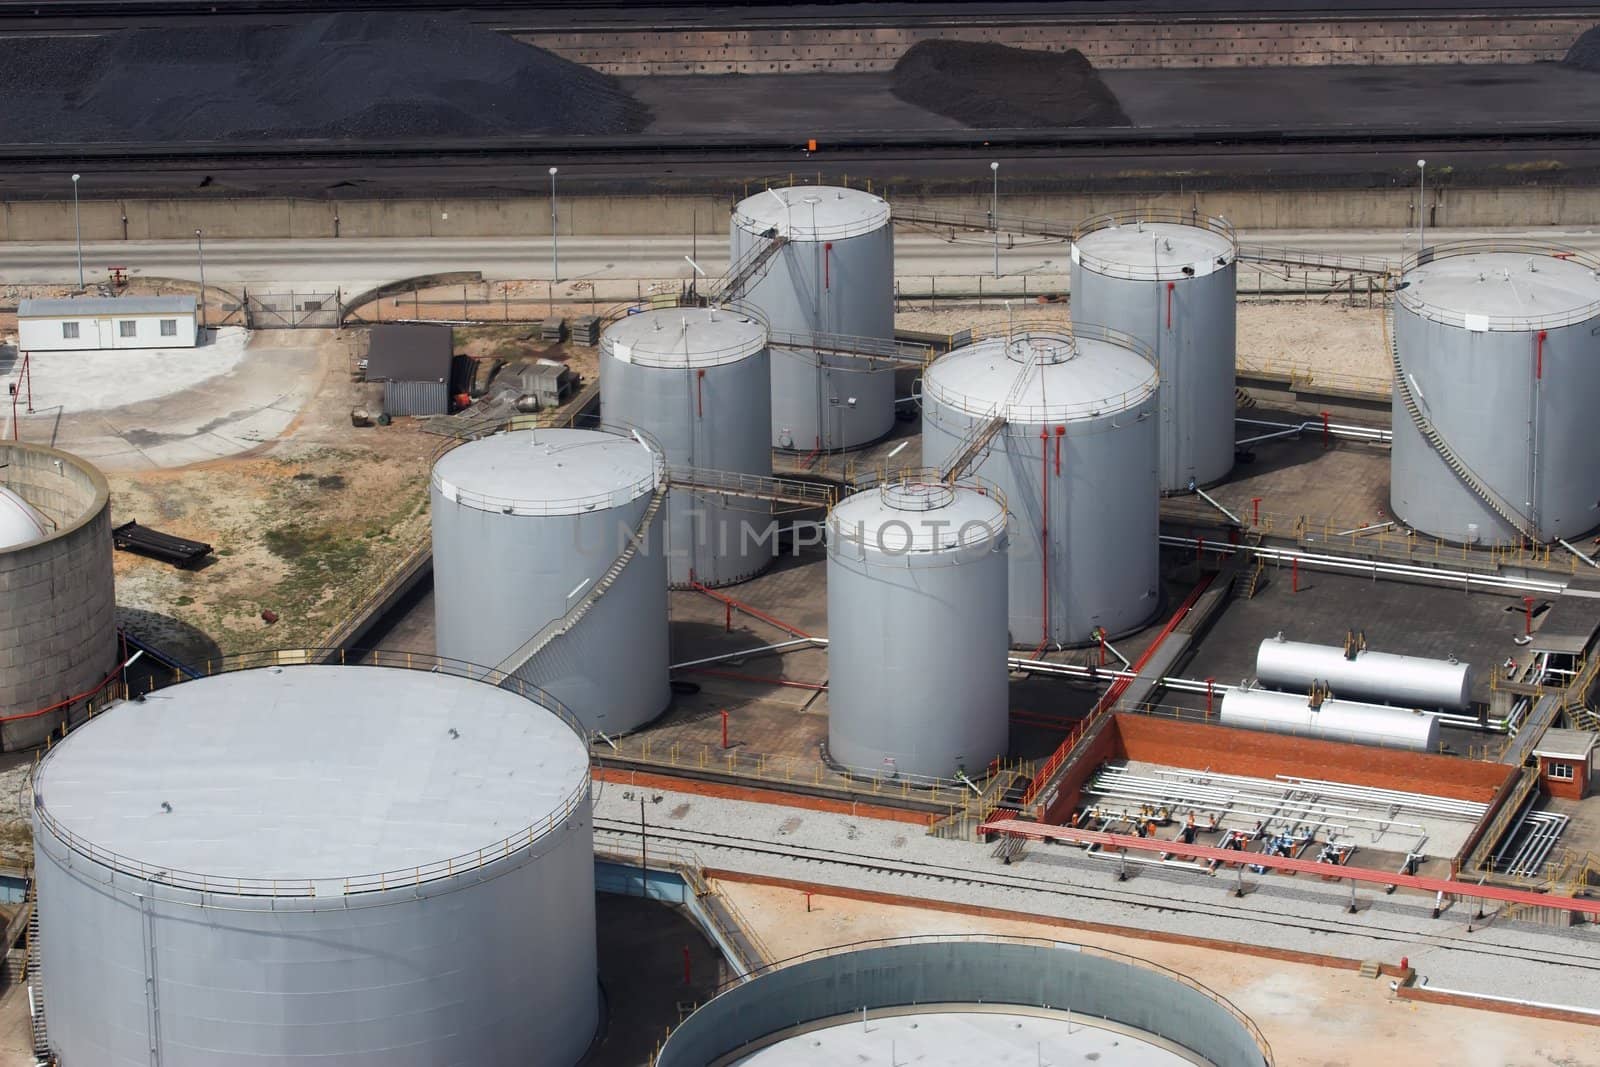 Oil, gasoline and gas storage at a refinery